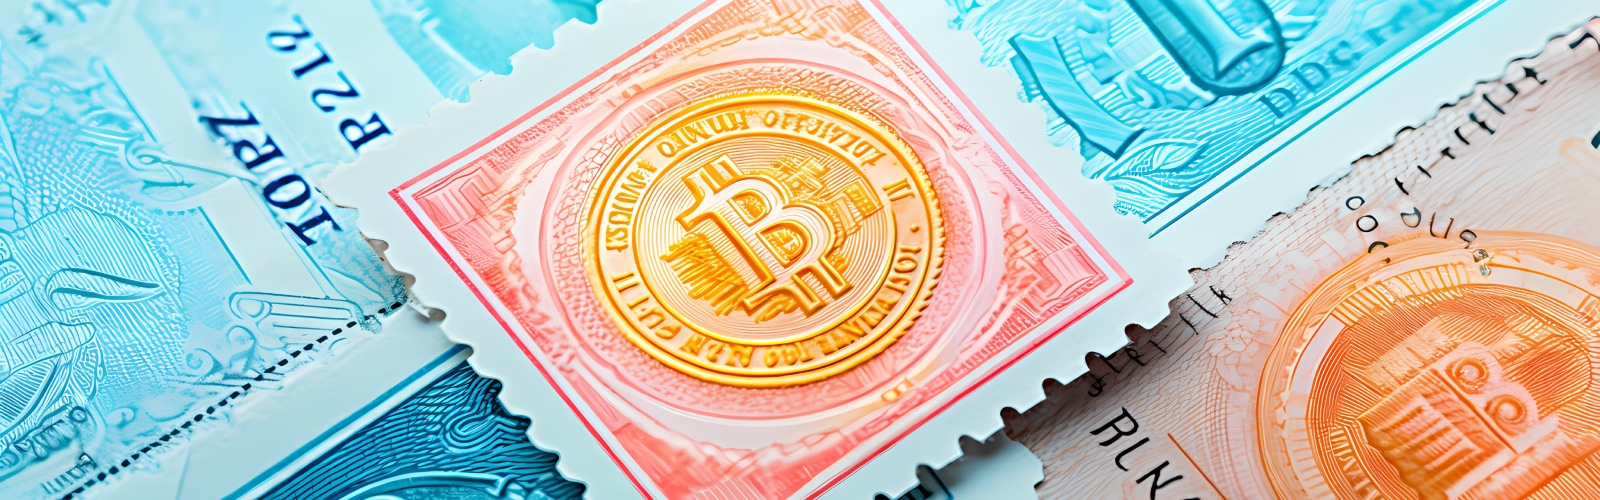 A postage stamp with a bitcoin symbol on it